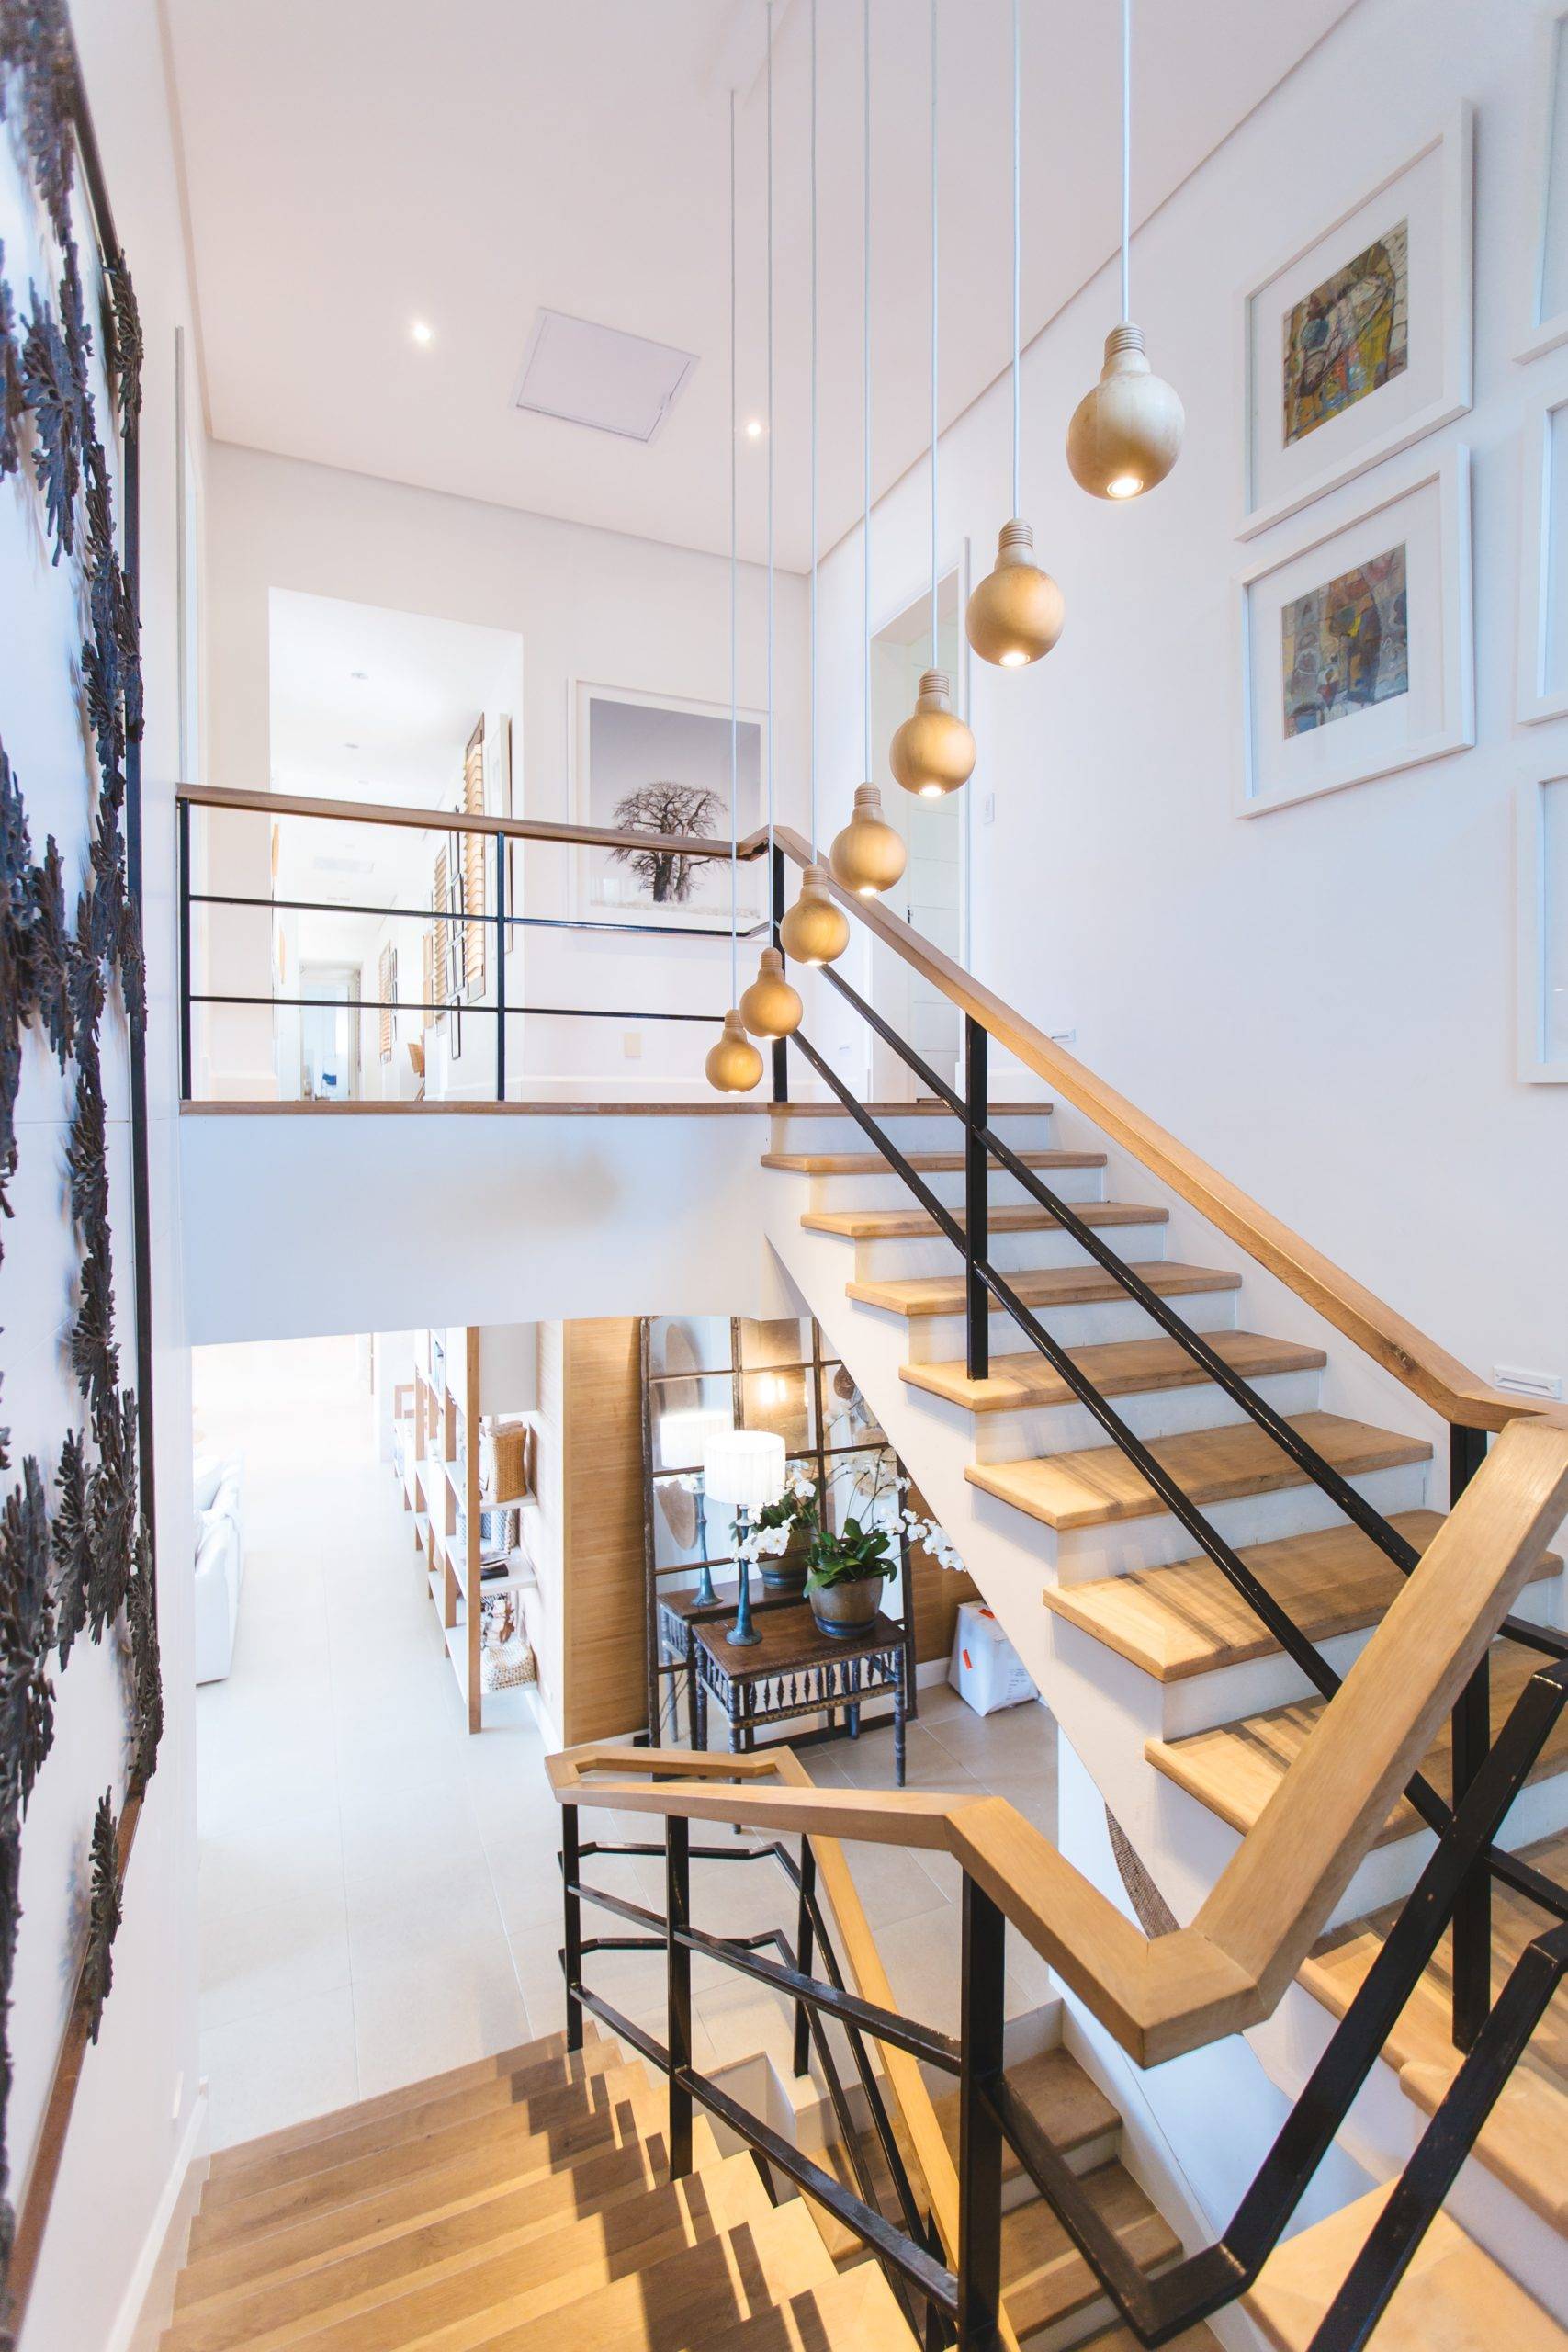 Modern-Staircase-Photo-by-Jason-Briscoe-11885-scaled